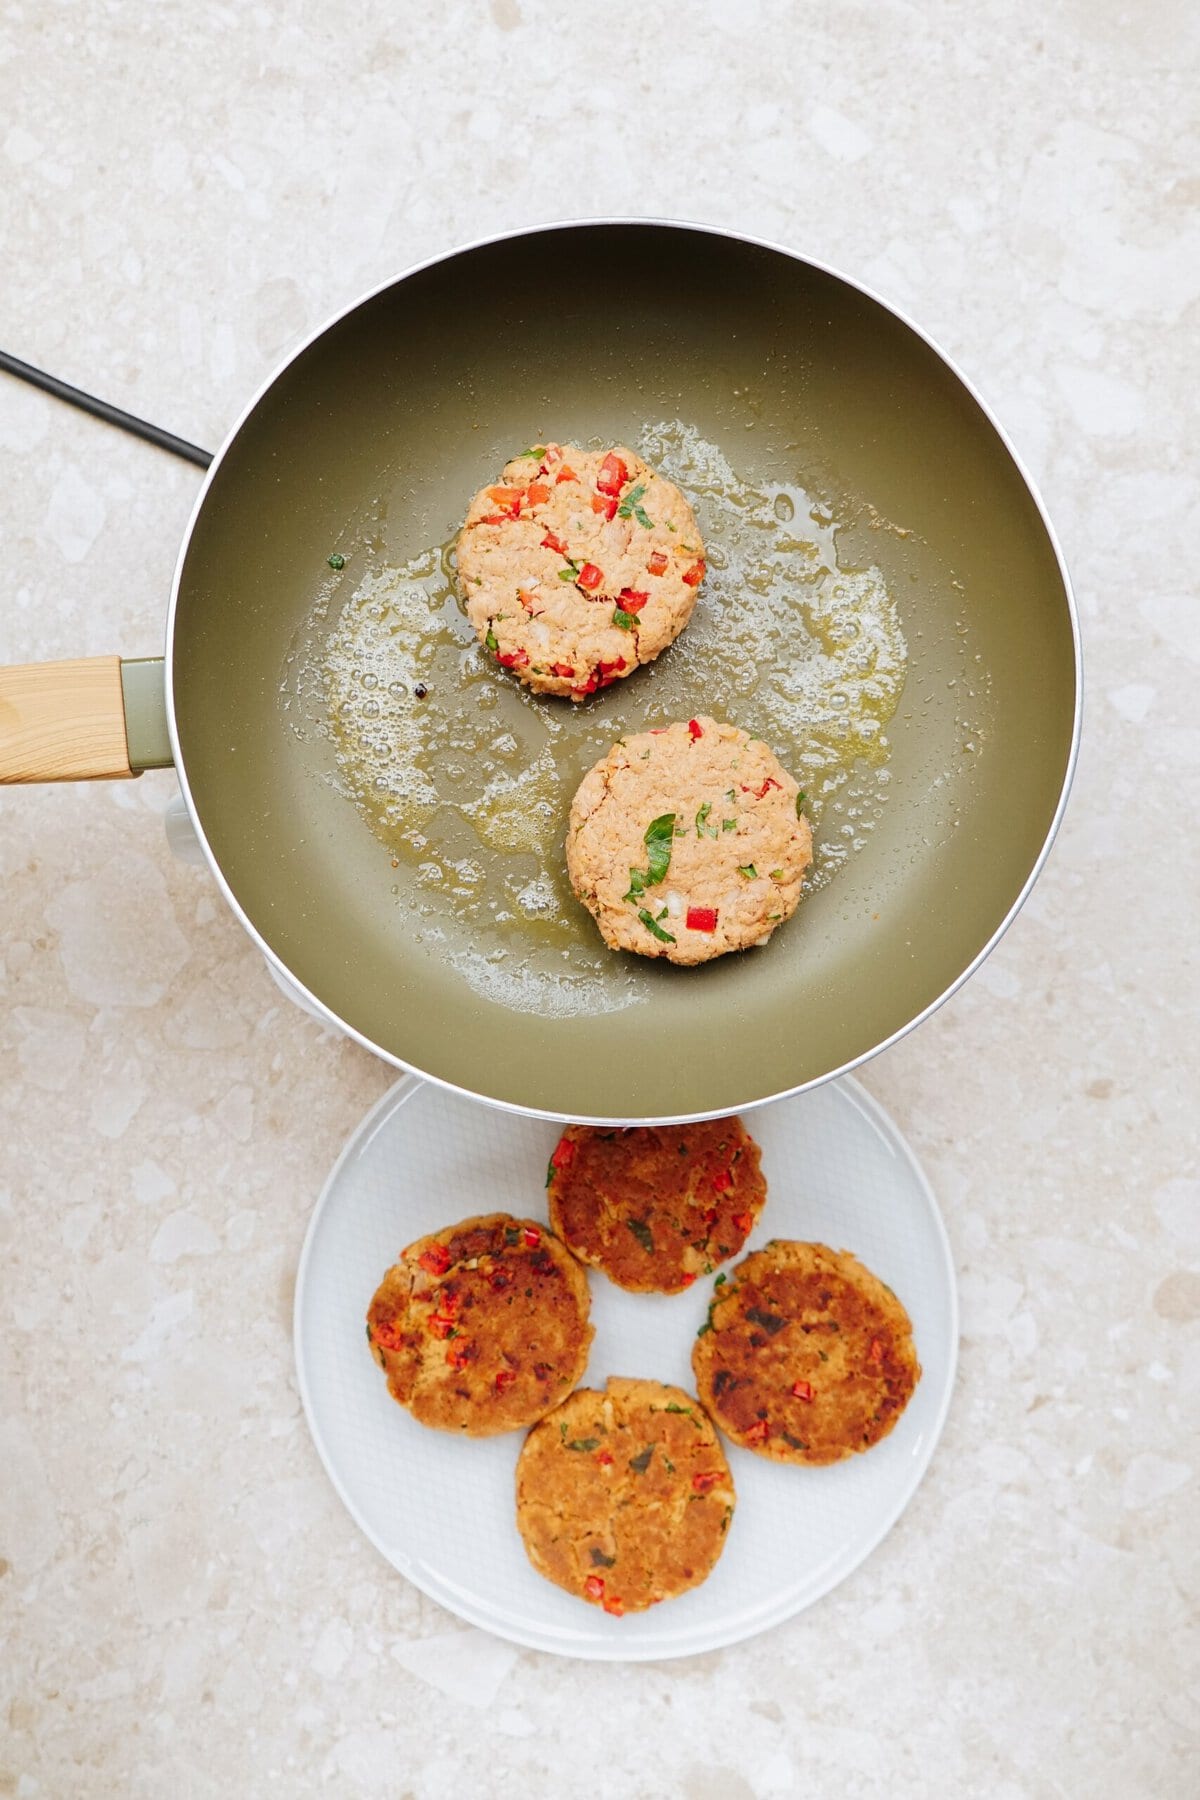 Two tuna patties sizzle in a non-stick frying pan, while three cooked patties rest on a white plate beside the pan.